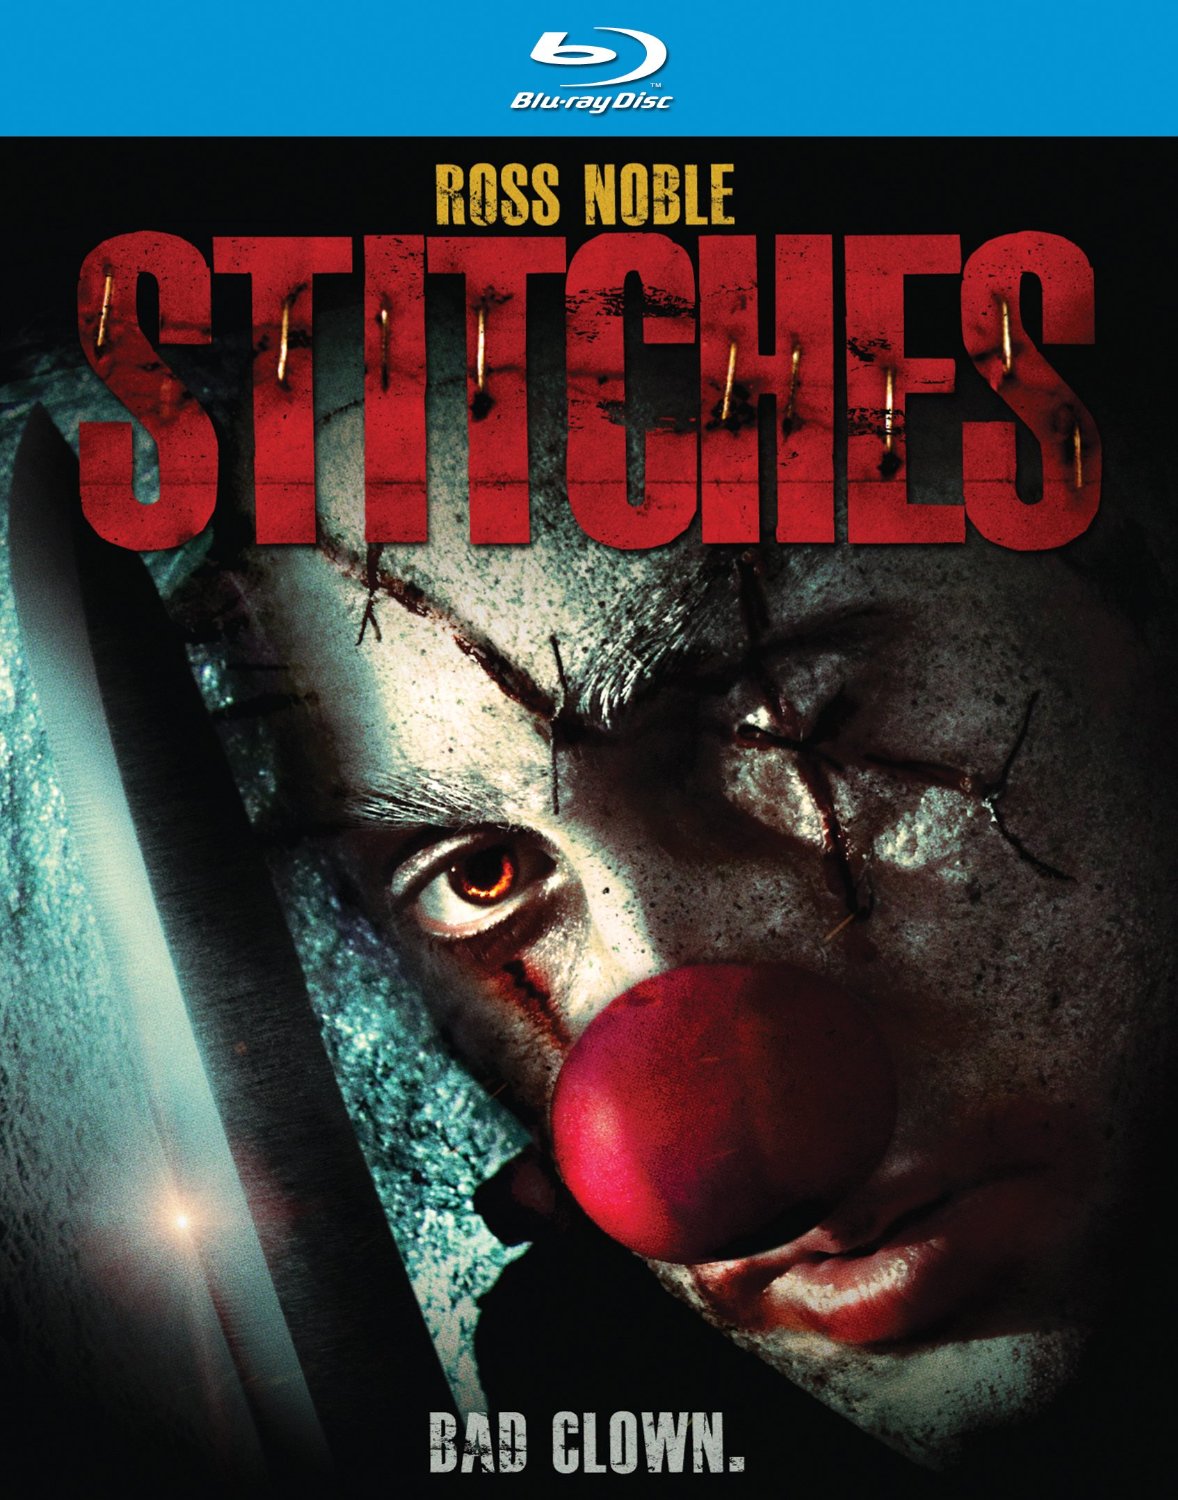 DVD Reviews: Stitches